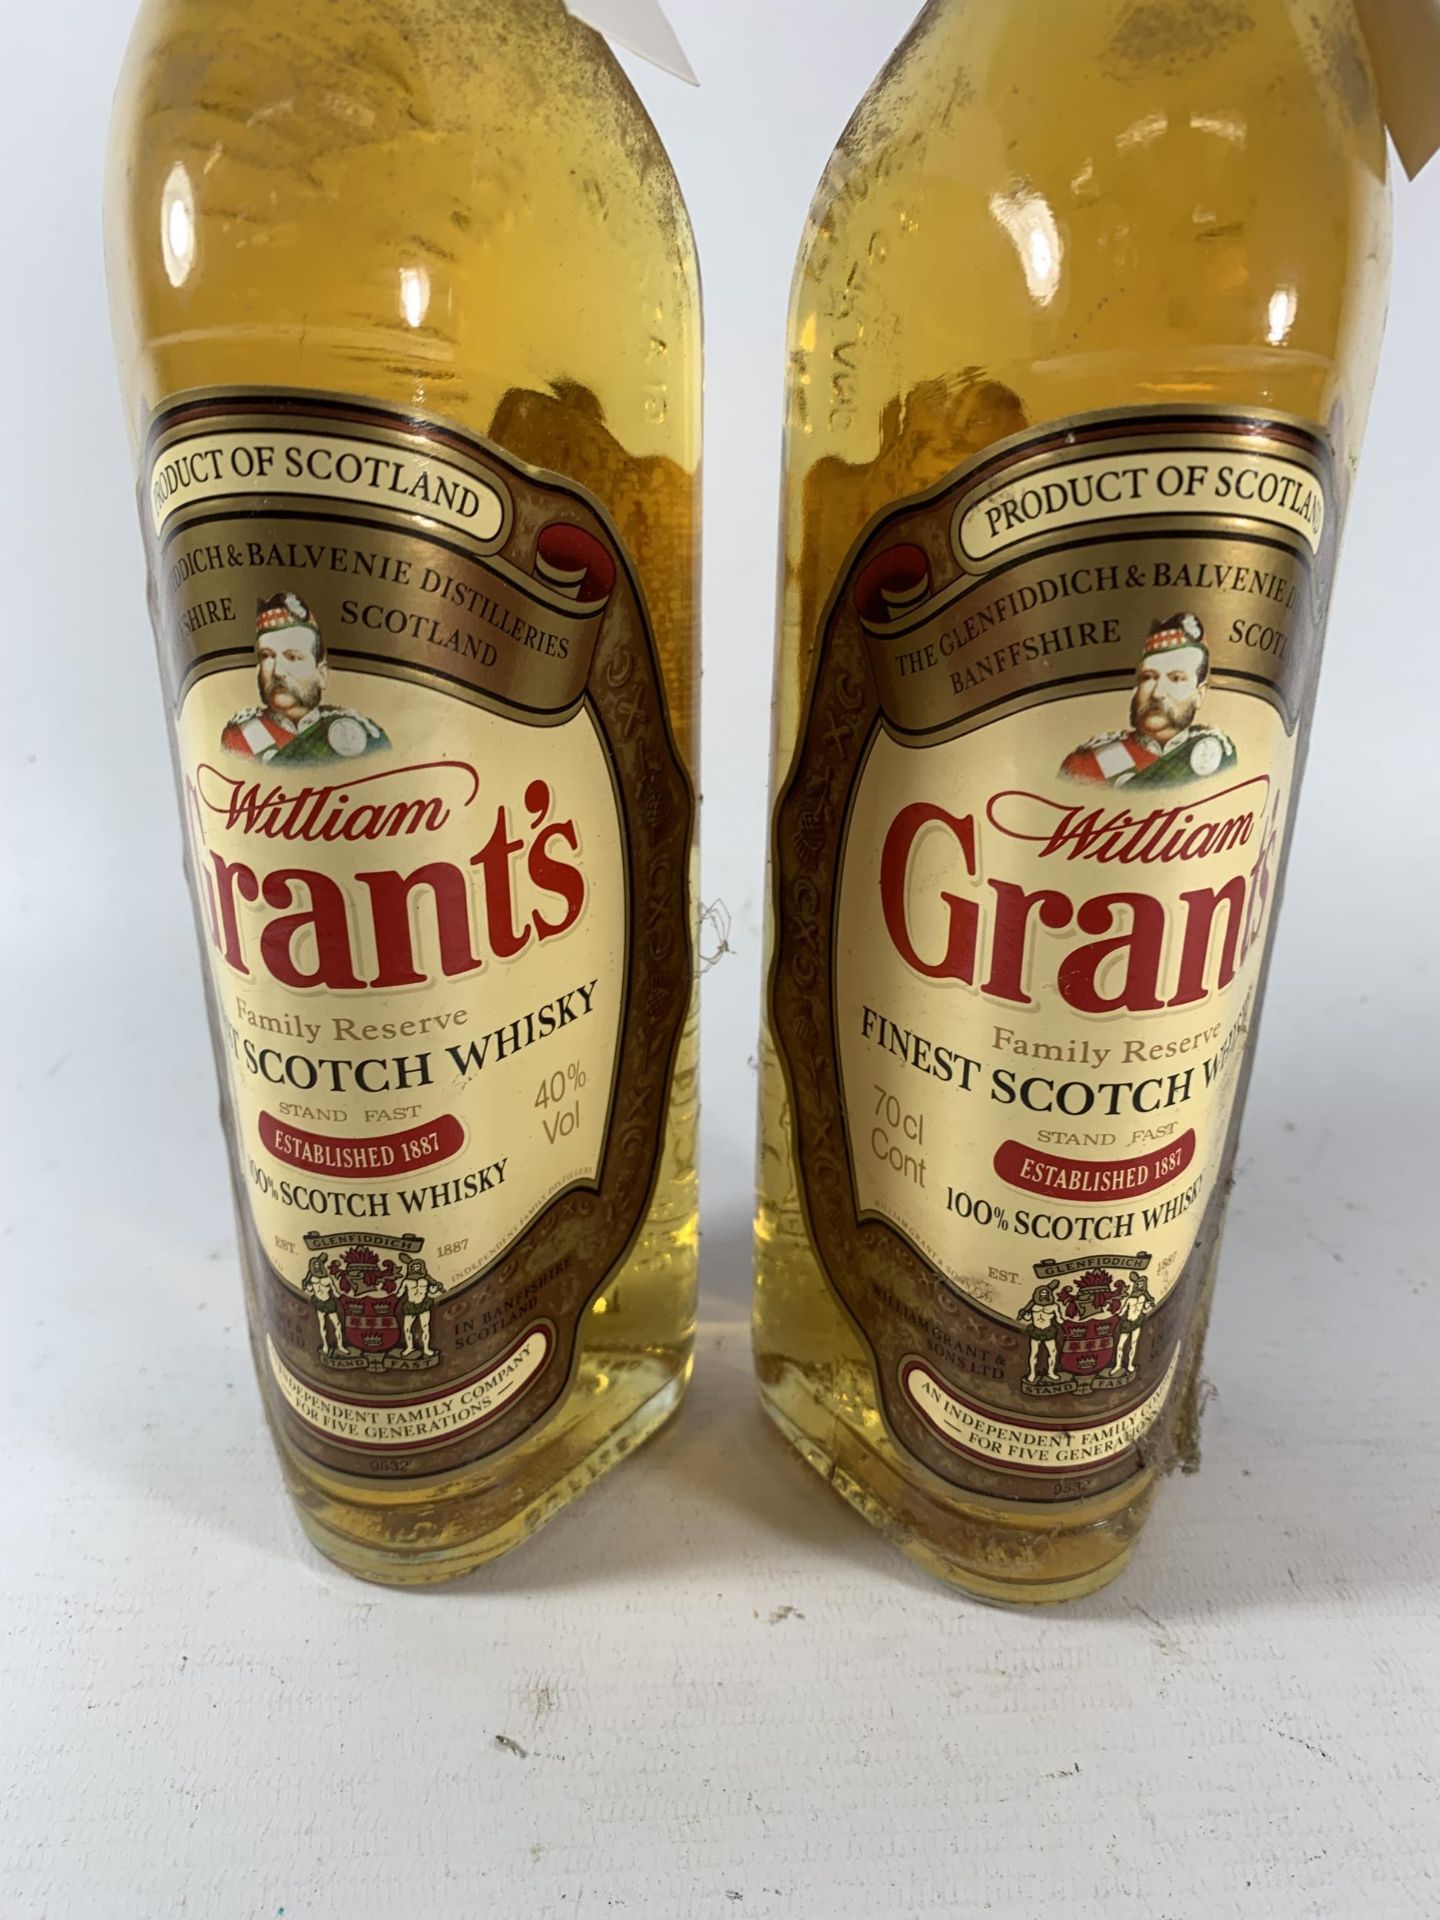 2 X 70CL BOTTLES - WILLIAM GRANT'S FAMILY RESERVE FINEST SCOTCH WHISKY - Image 2 of 3